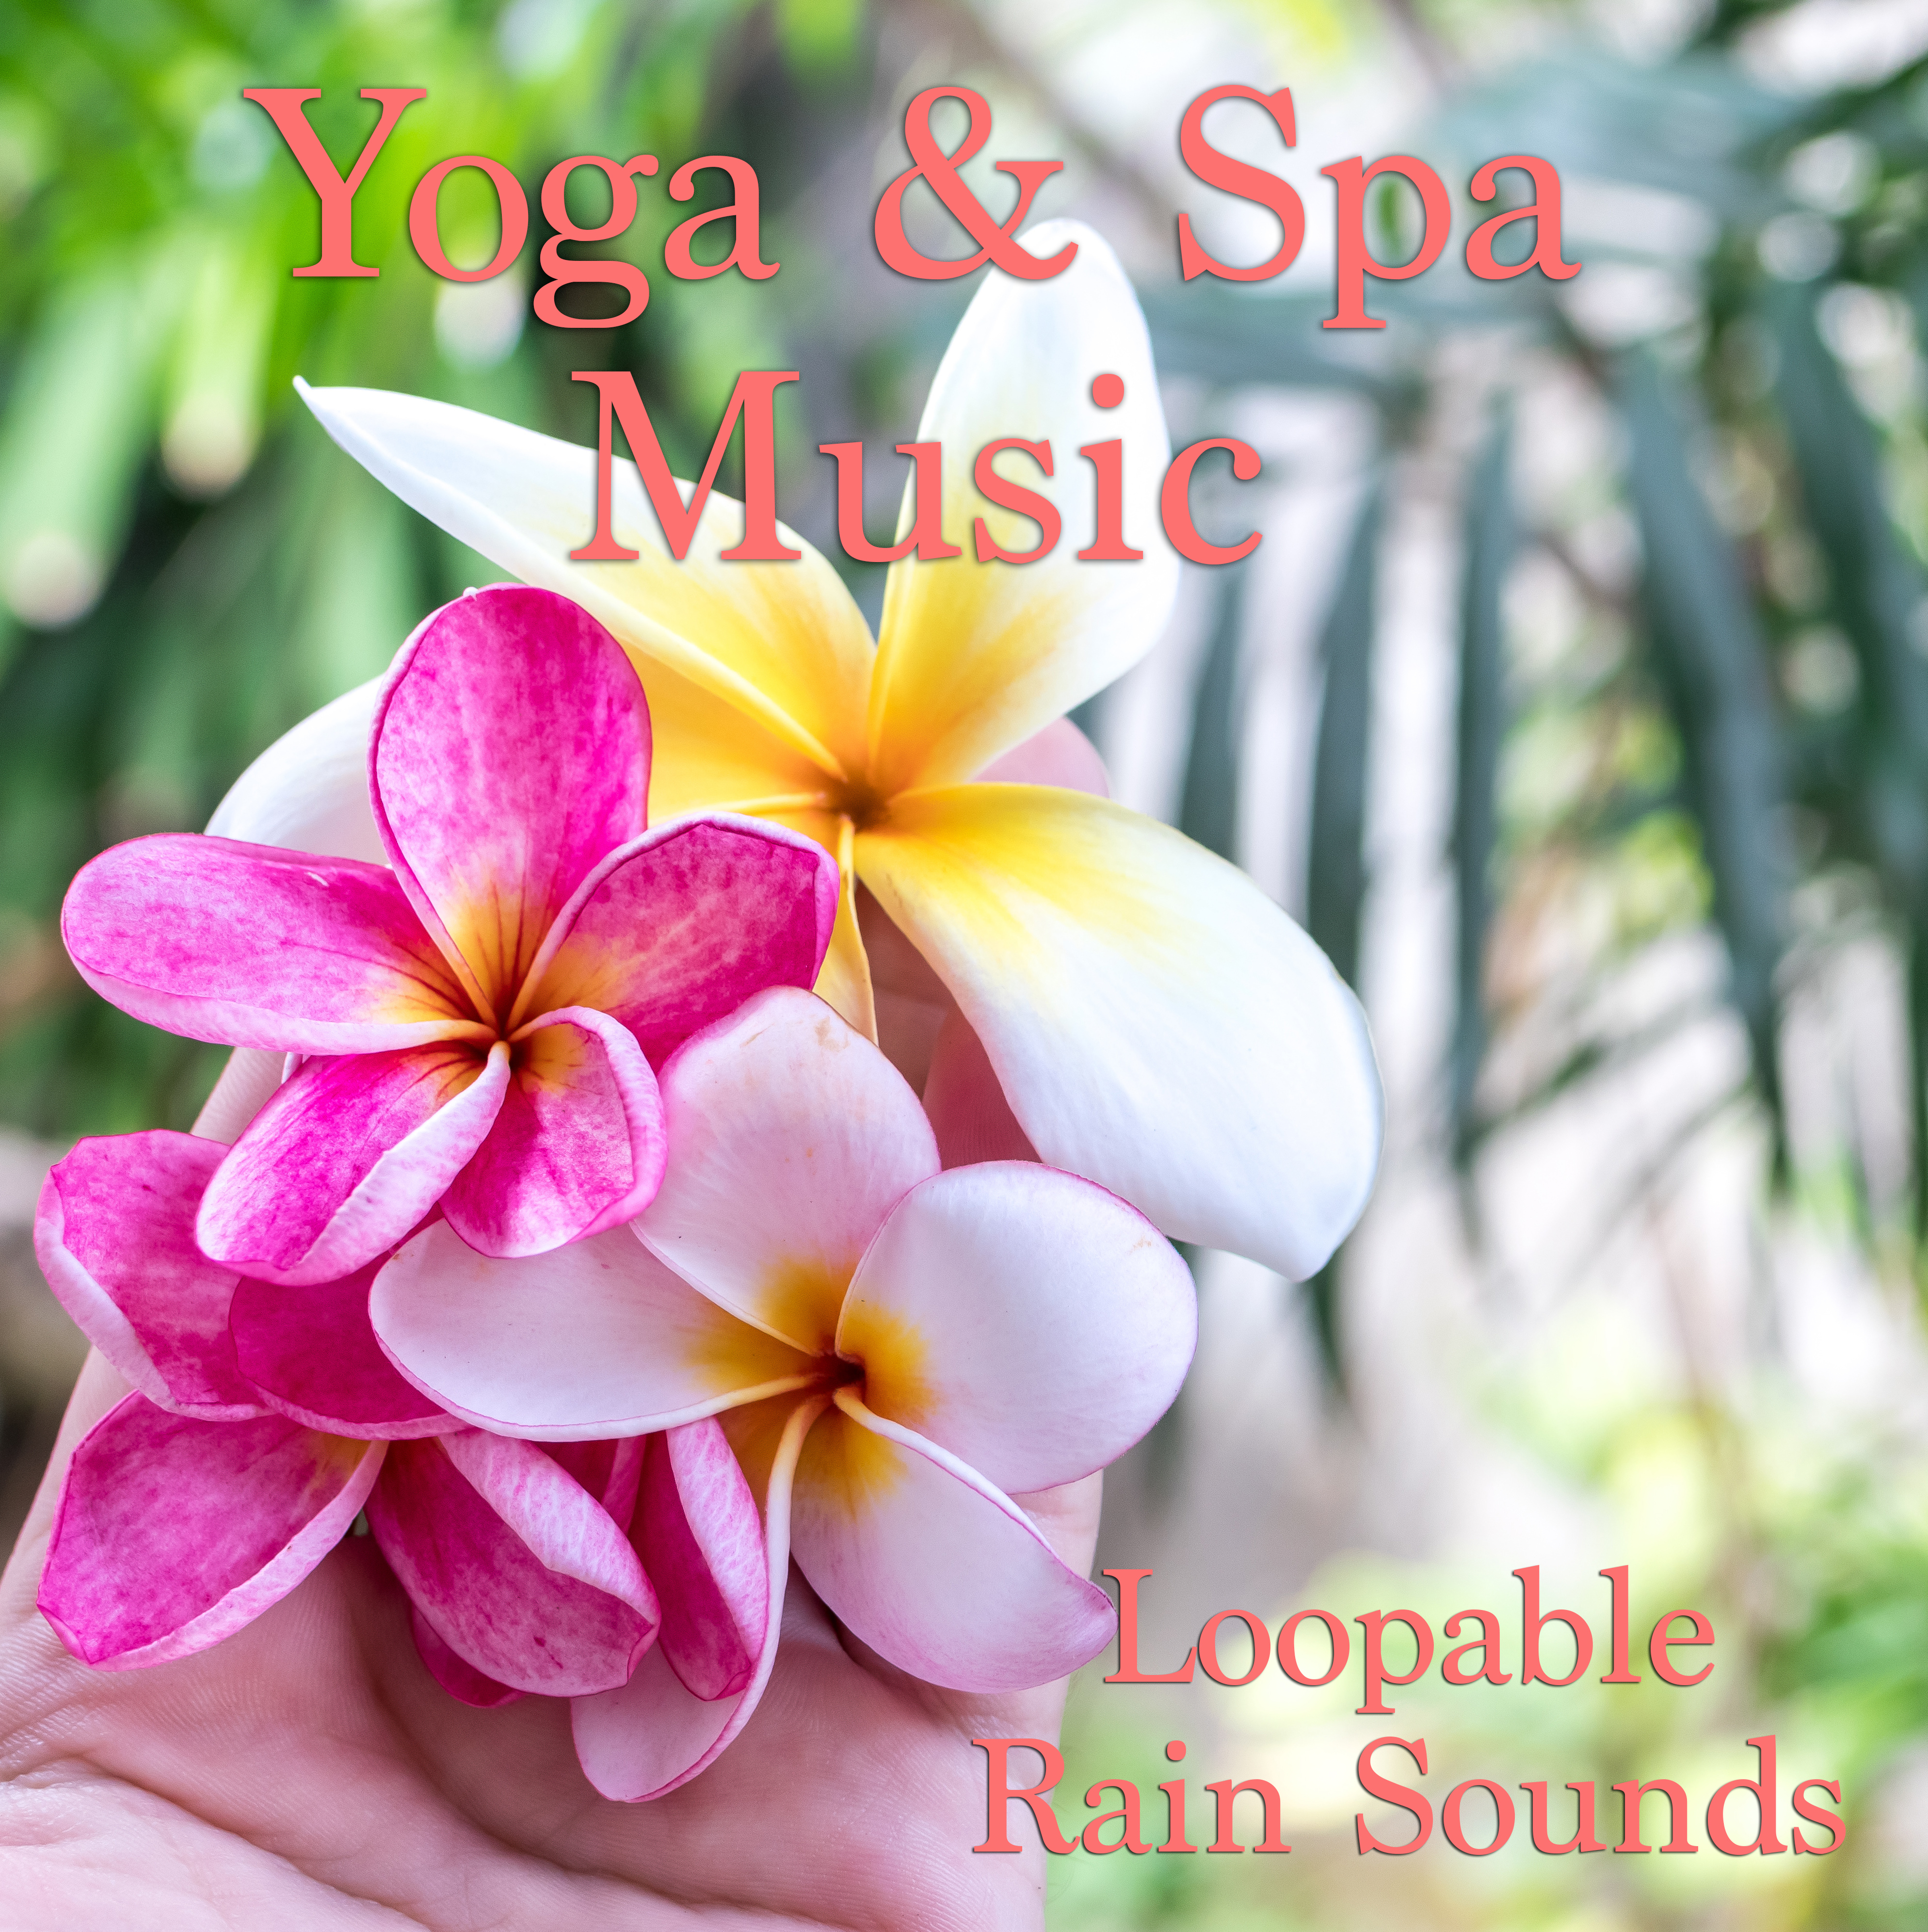 13 Spa Rain Sounds. Loopable Yoga Music, Meditation Sounds for Calm Atmosphere - All Loopable with No Fades